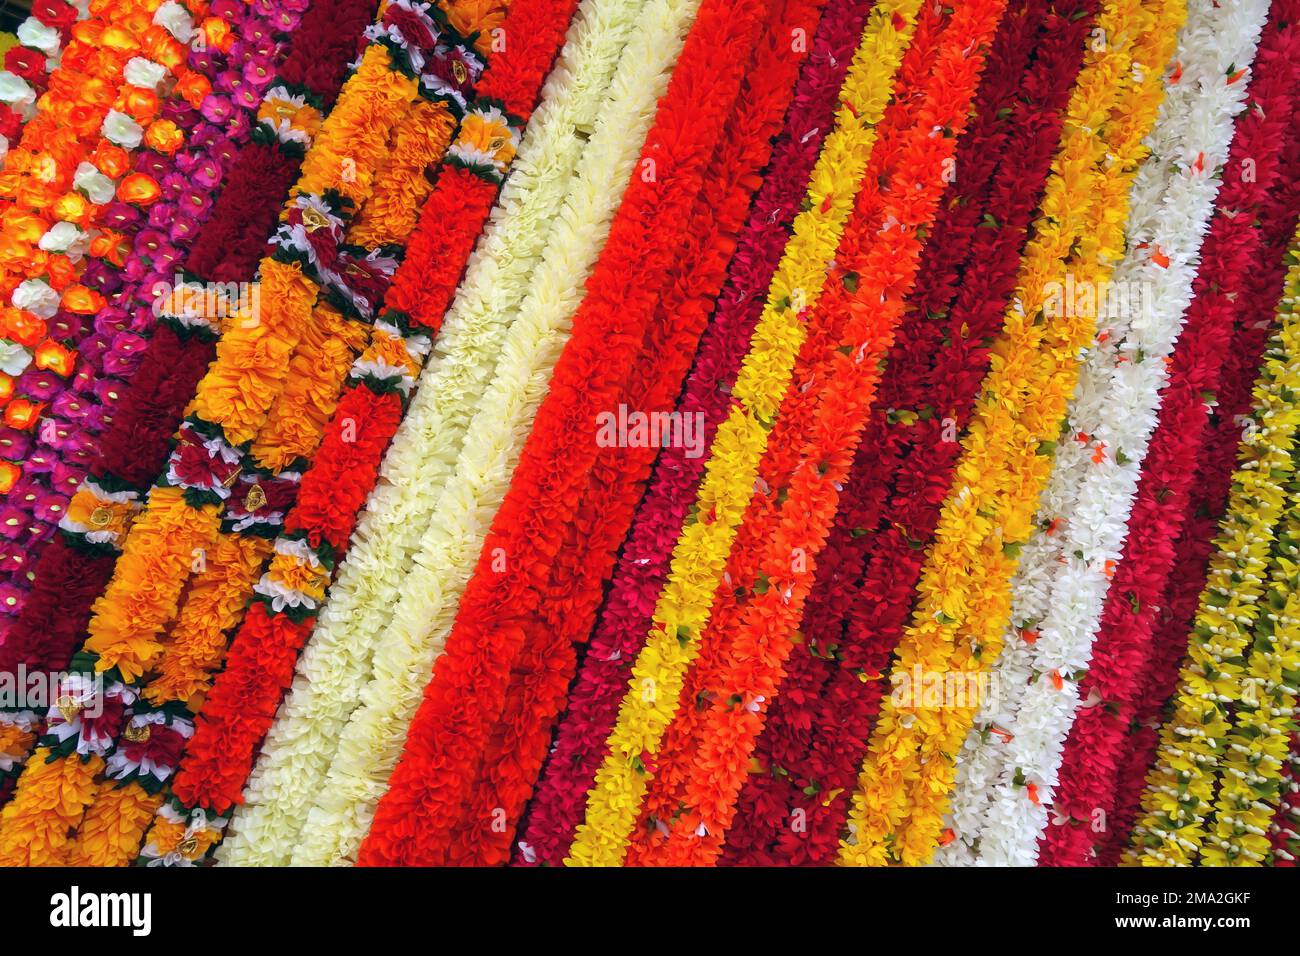 Artificial flower strands available for purchase as part of preparations for the Hindu festival of Diwali, George Town, Penang, Malaysia Stock Photo